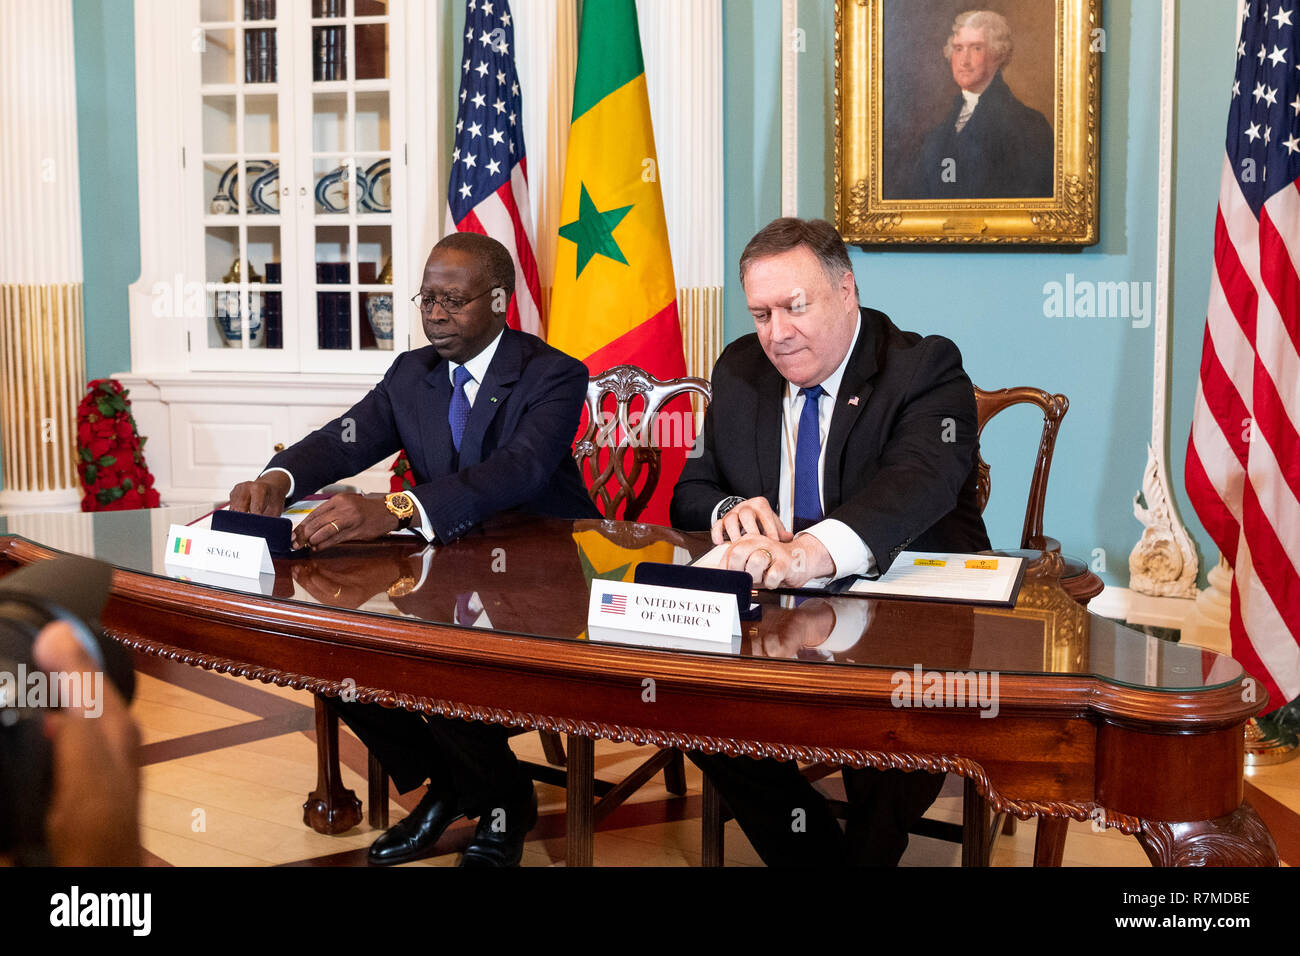 US Secretary of State Mike Pompeo and Senegalese Prime Minister Mahammed Boun Abdallah Dionne at the Millennium Challenge Cooperation Signing Ceremony in the Treaty Room at the Department of State in Washington, DC. Stock Photo